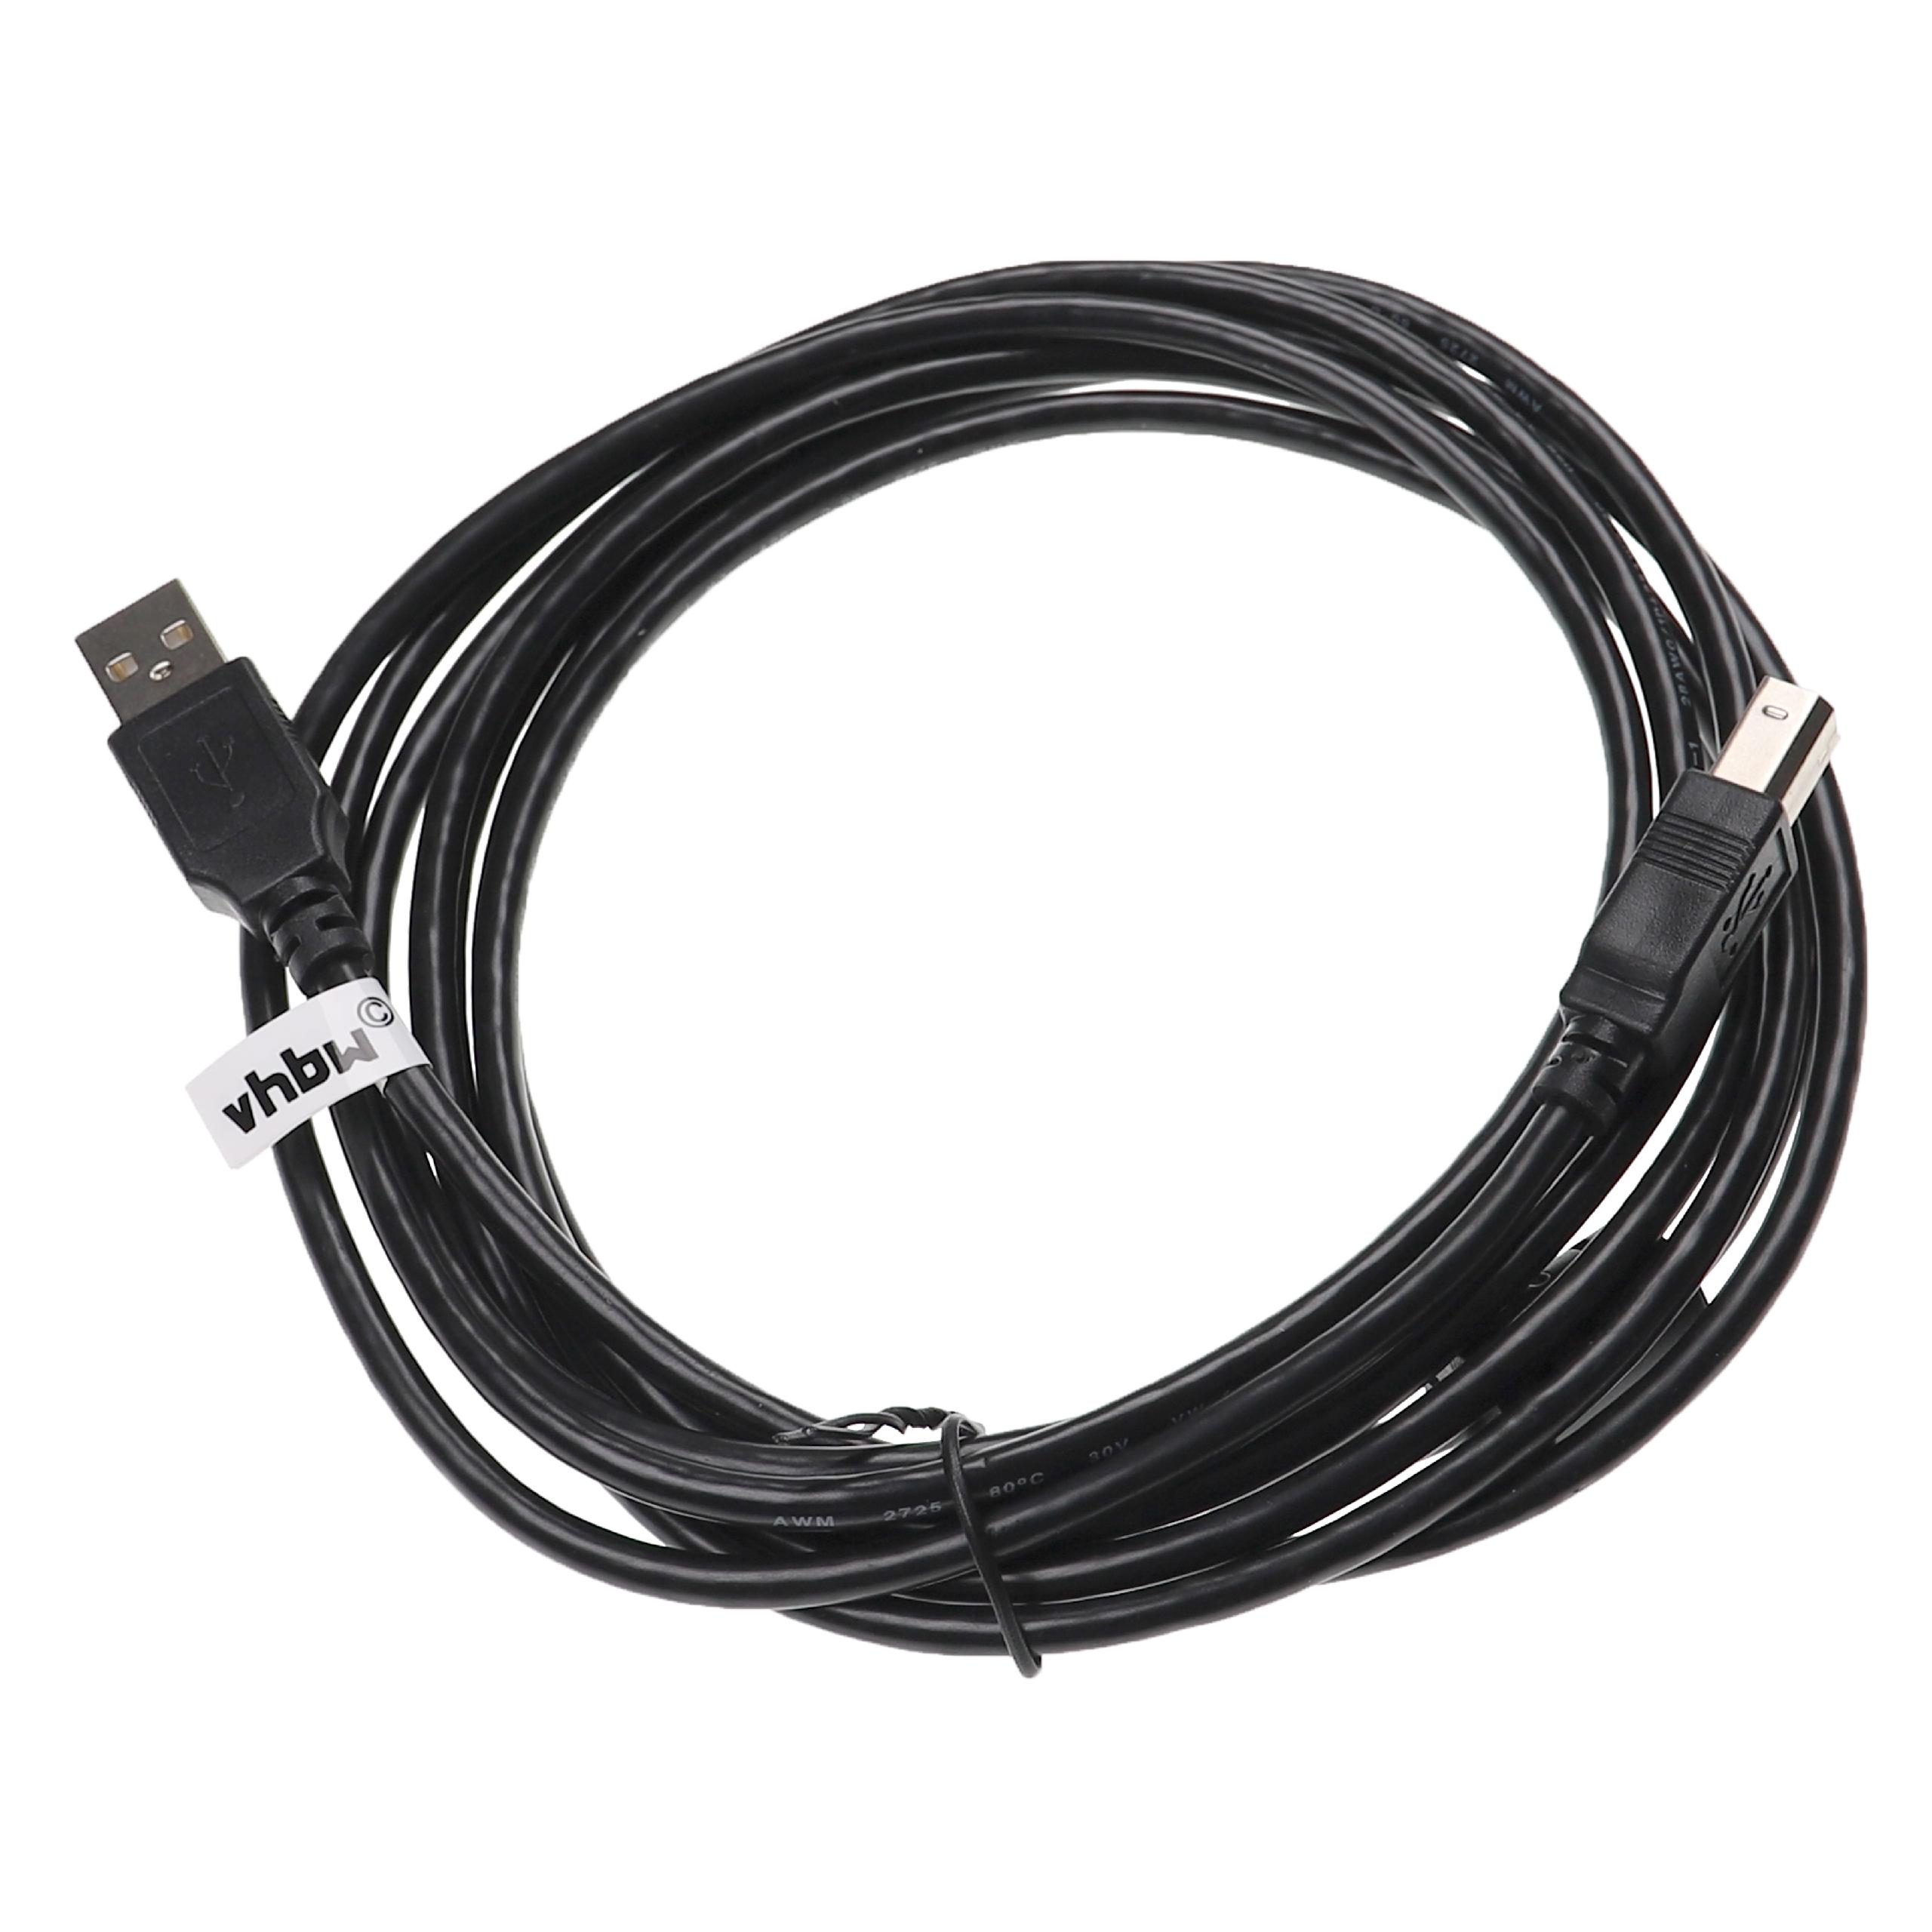 USB A to USB B Adapter Cable for Printer, Scanner, Fax Machine - USB Connection Cable